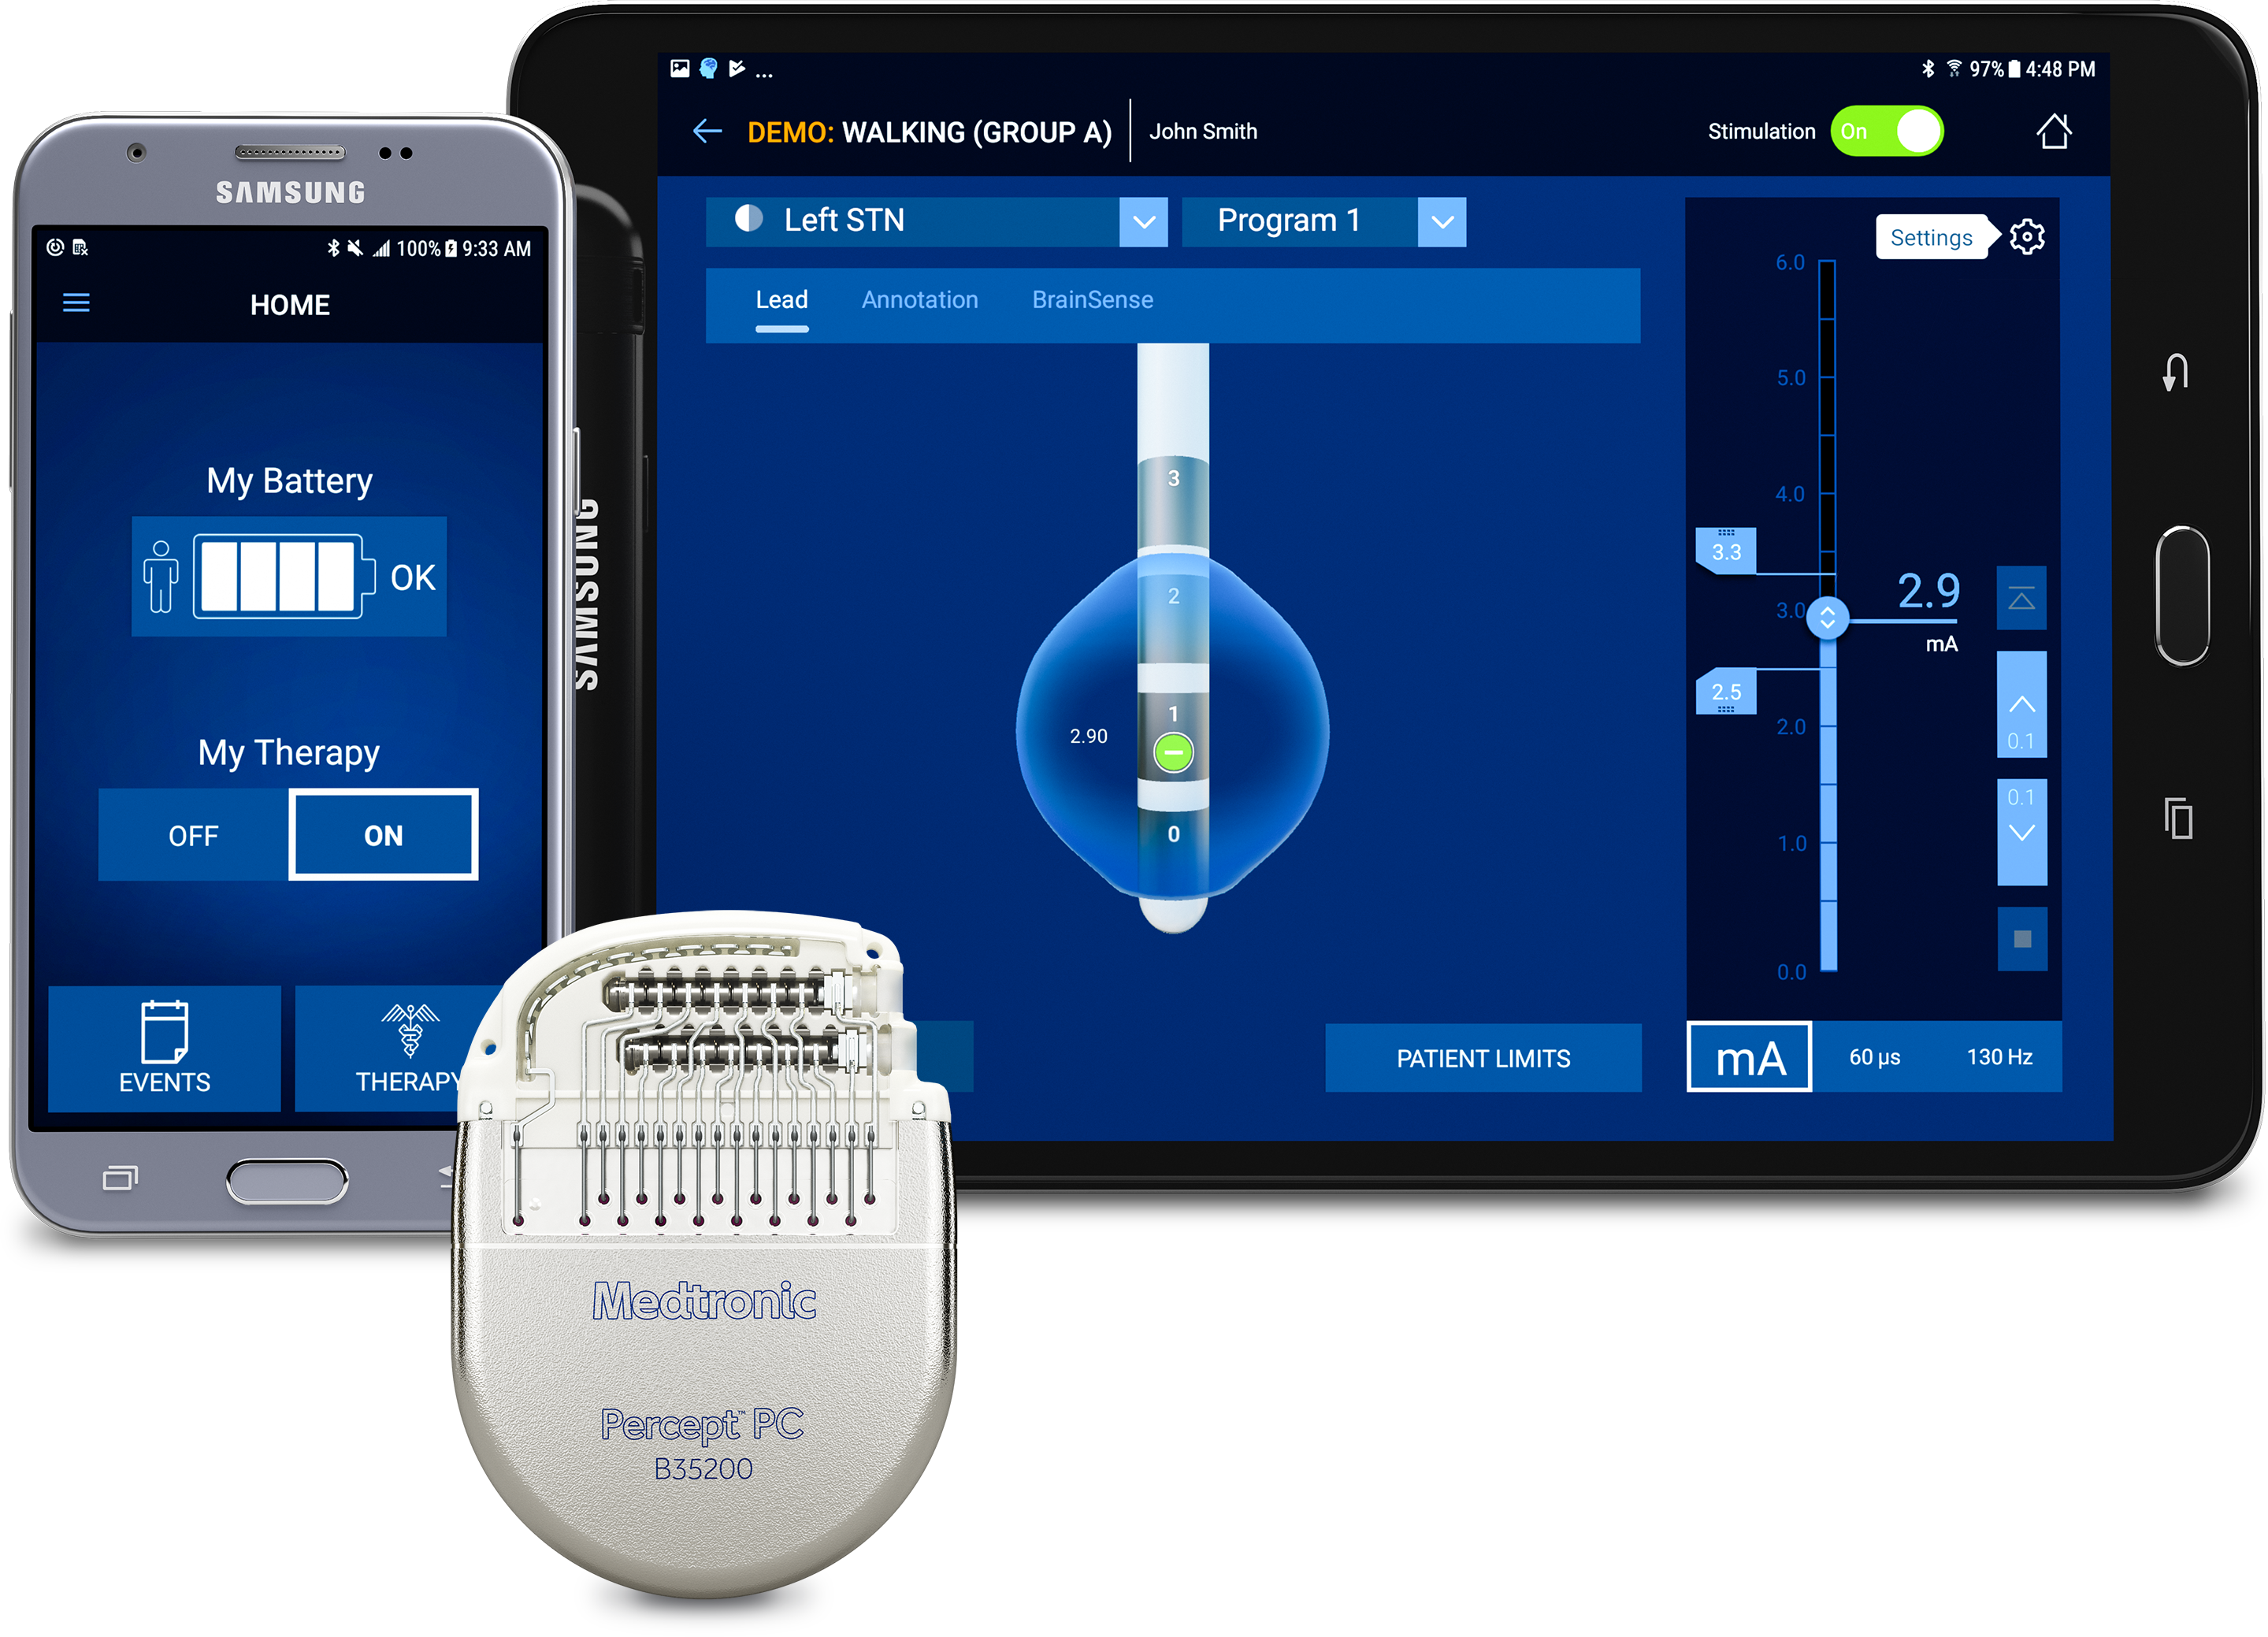 Medtronic Receives the US FDA's Approval for its Percept PC Neurostimulator with BrainSense Technology